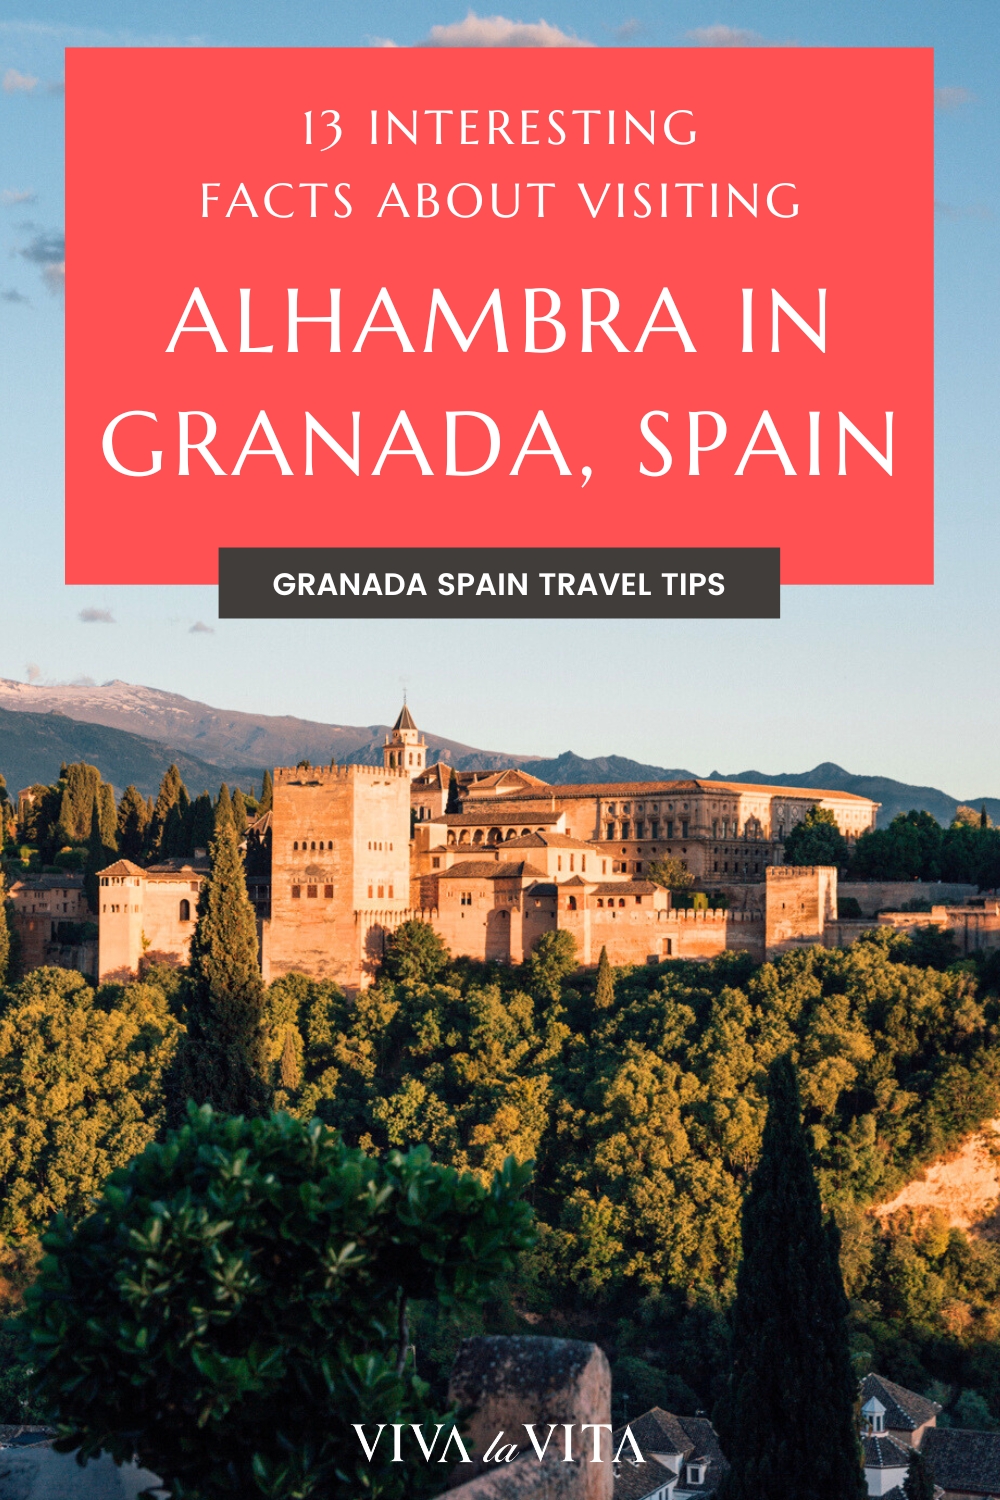 Pinterest image showing the Alhambra, with a headline: 13 interesting facts about visiting the Alhambra in Granada, Spain, Granada Spain travel tips